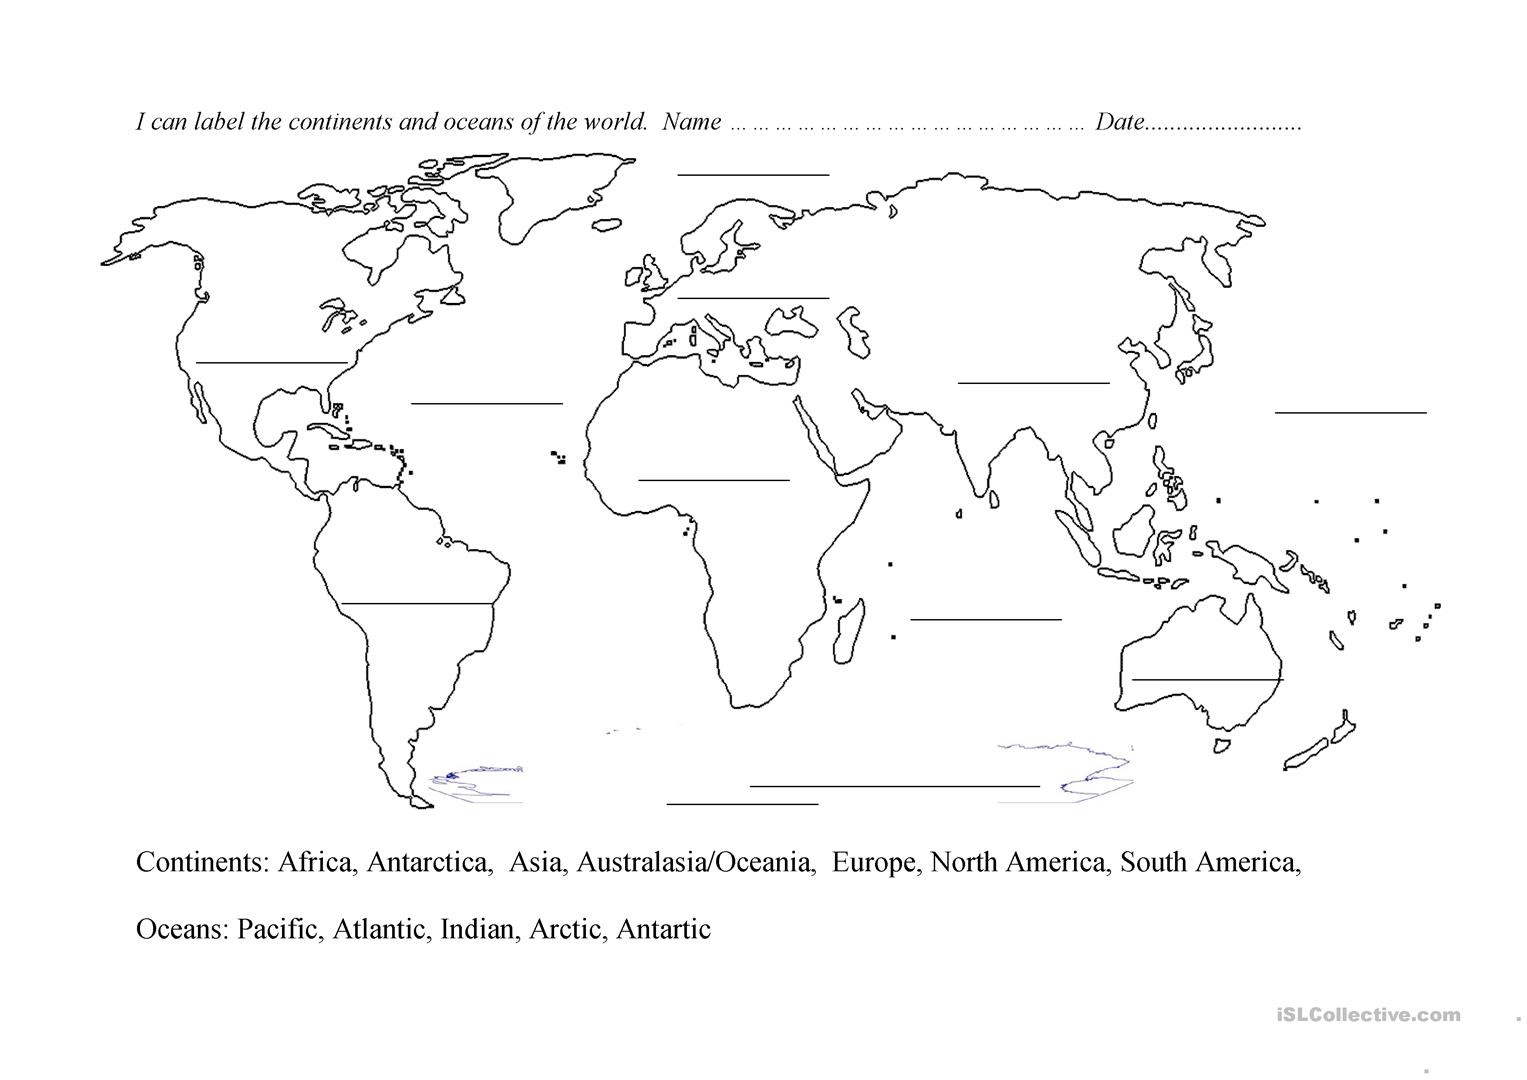 Continents And Oceans Blank Map Worksheet - Free Esl Printable - Free Printable Map Of Continents And Oceans